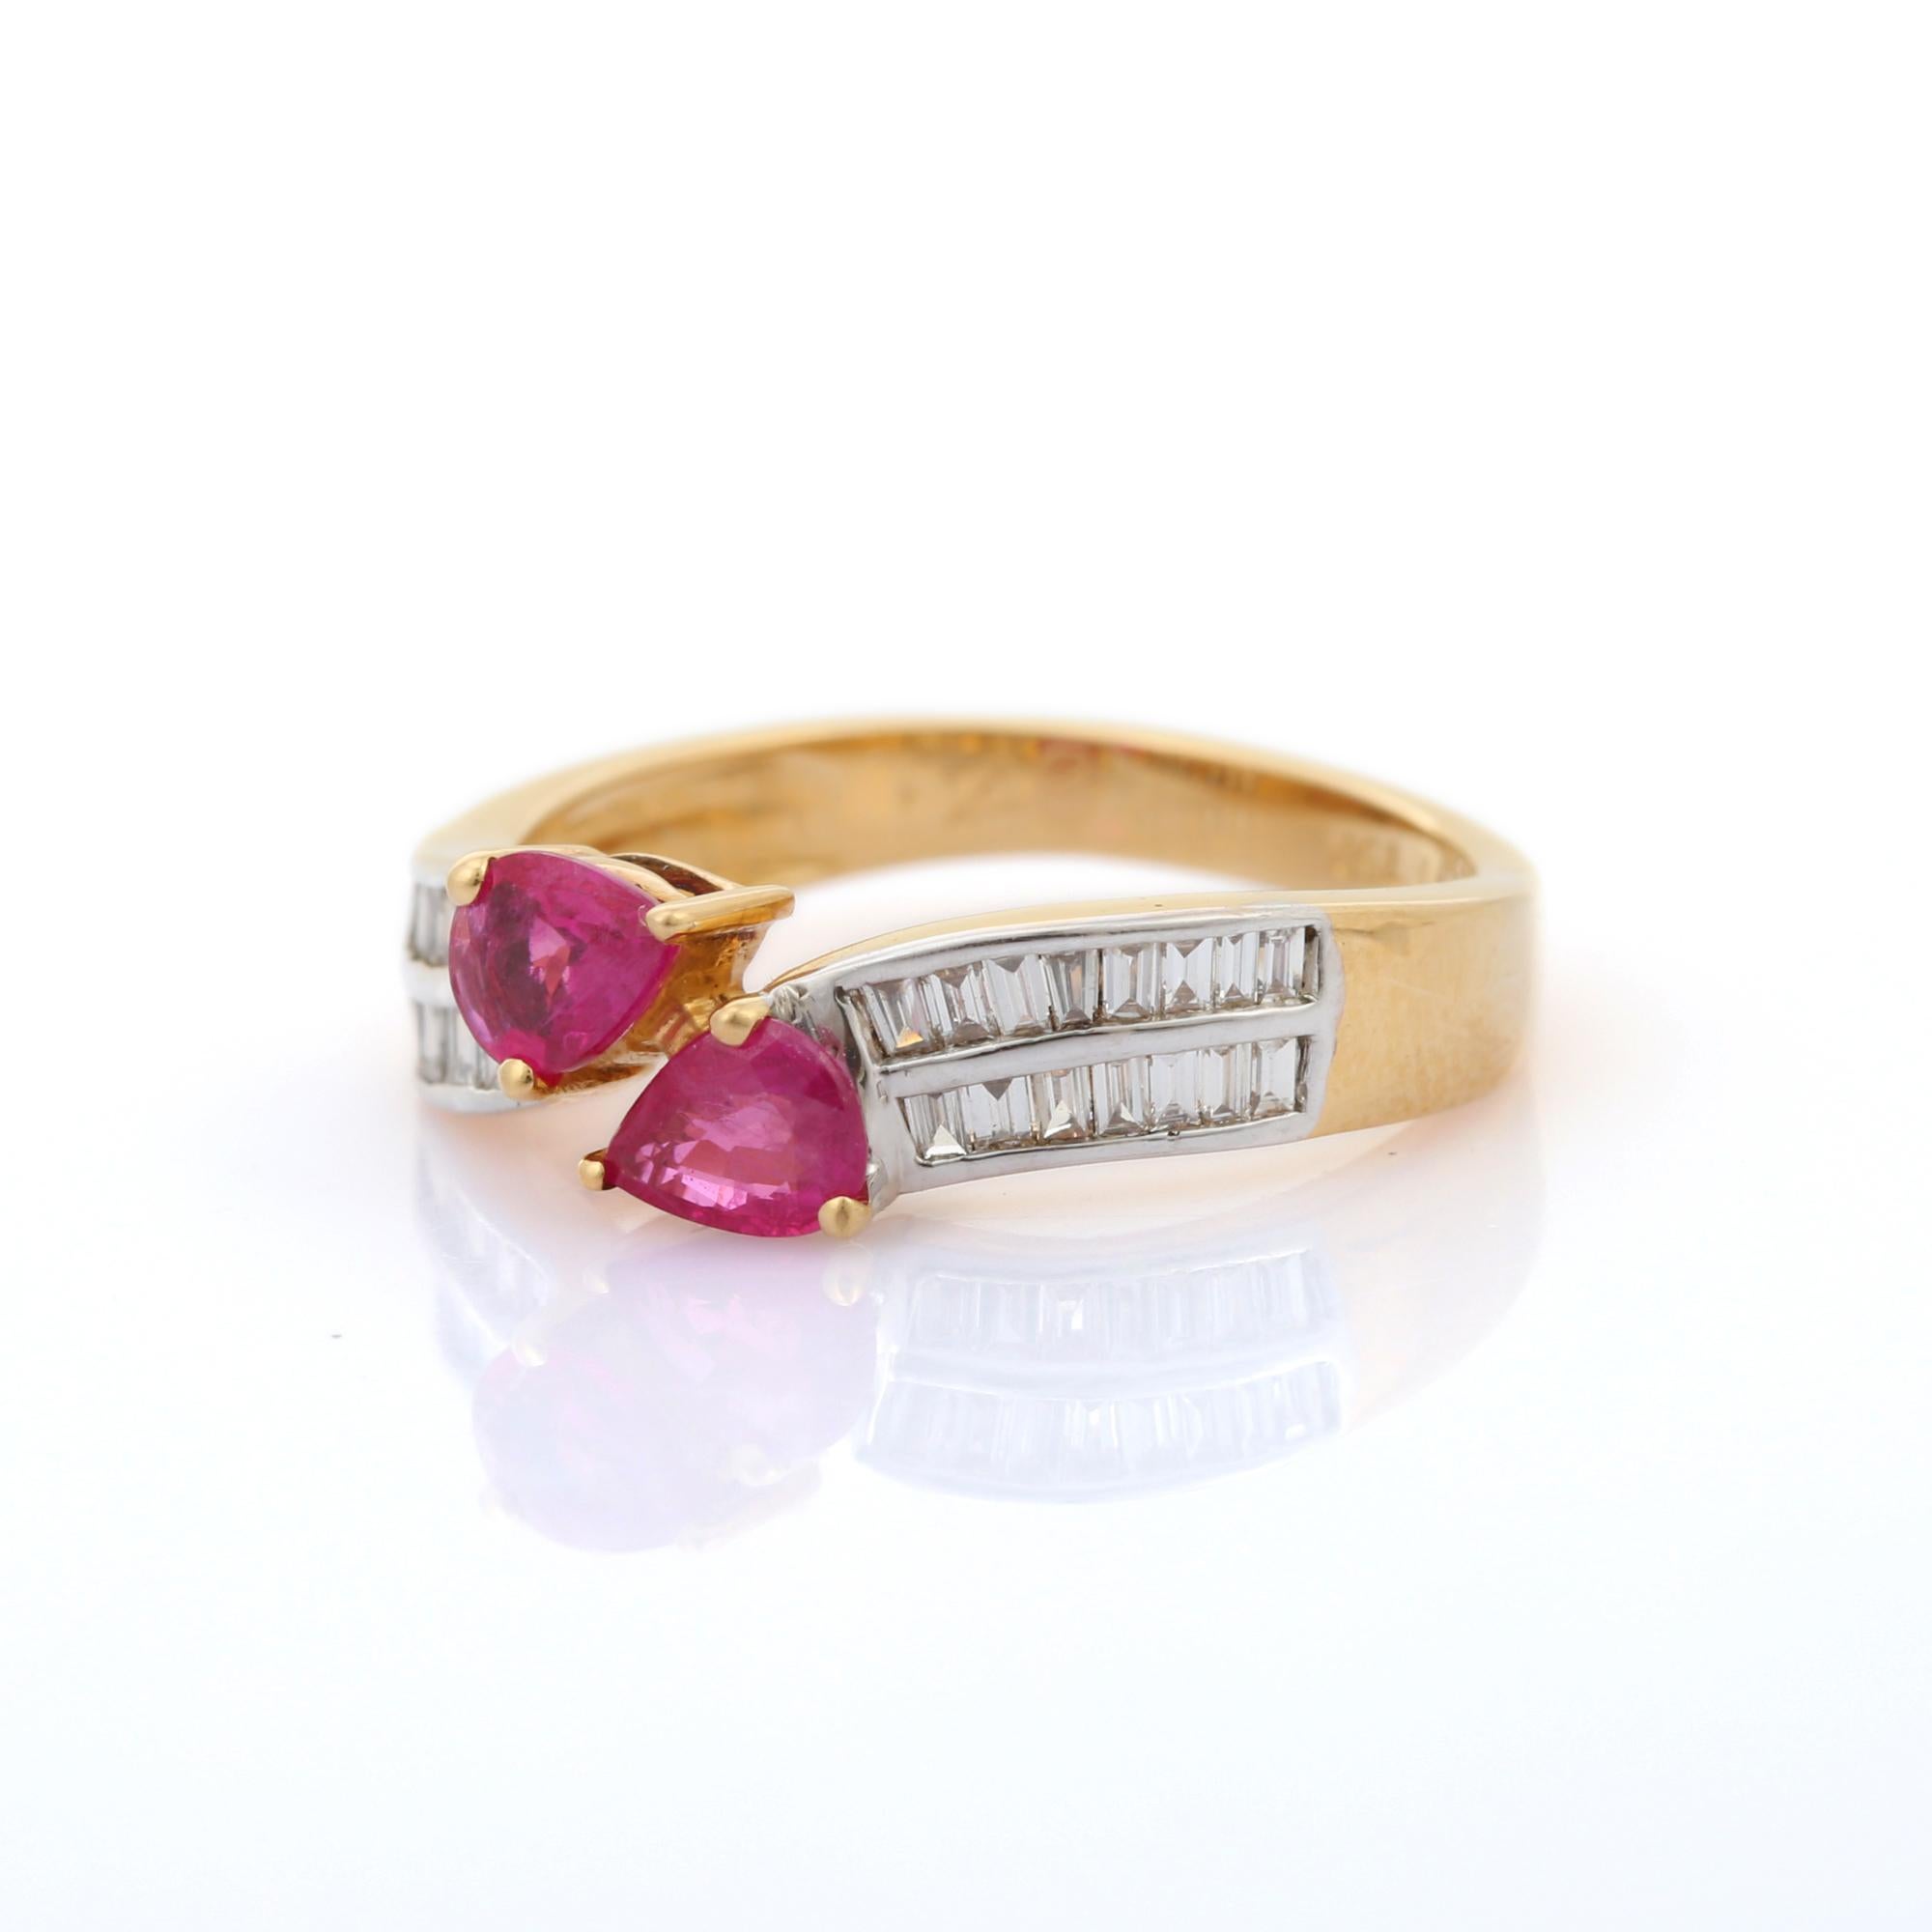 For Sale:  Handcrafted 18K Solid Yellow Gold Pear Cut Ruby and Diamond Wrap Around Ring 3